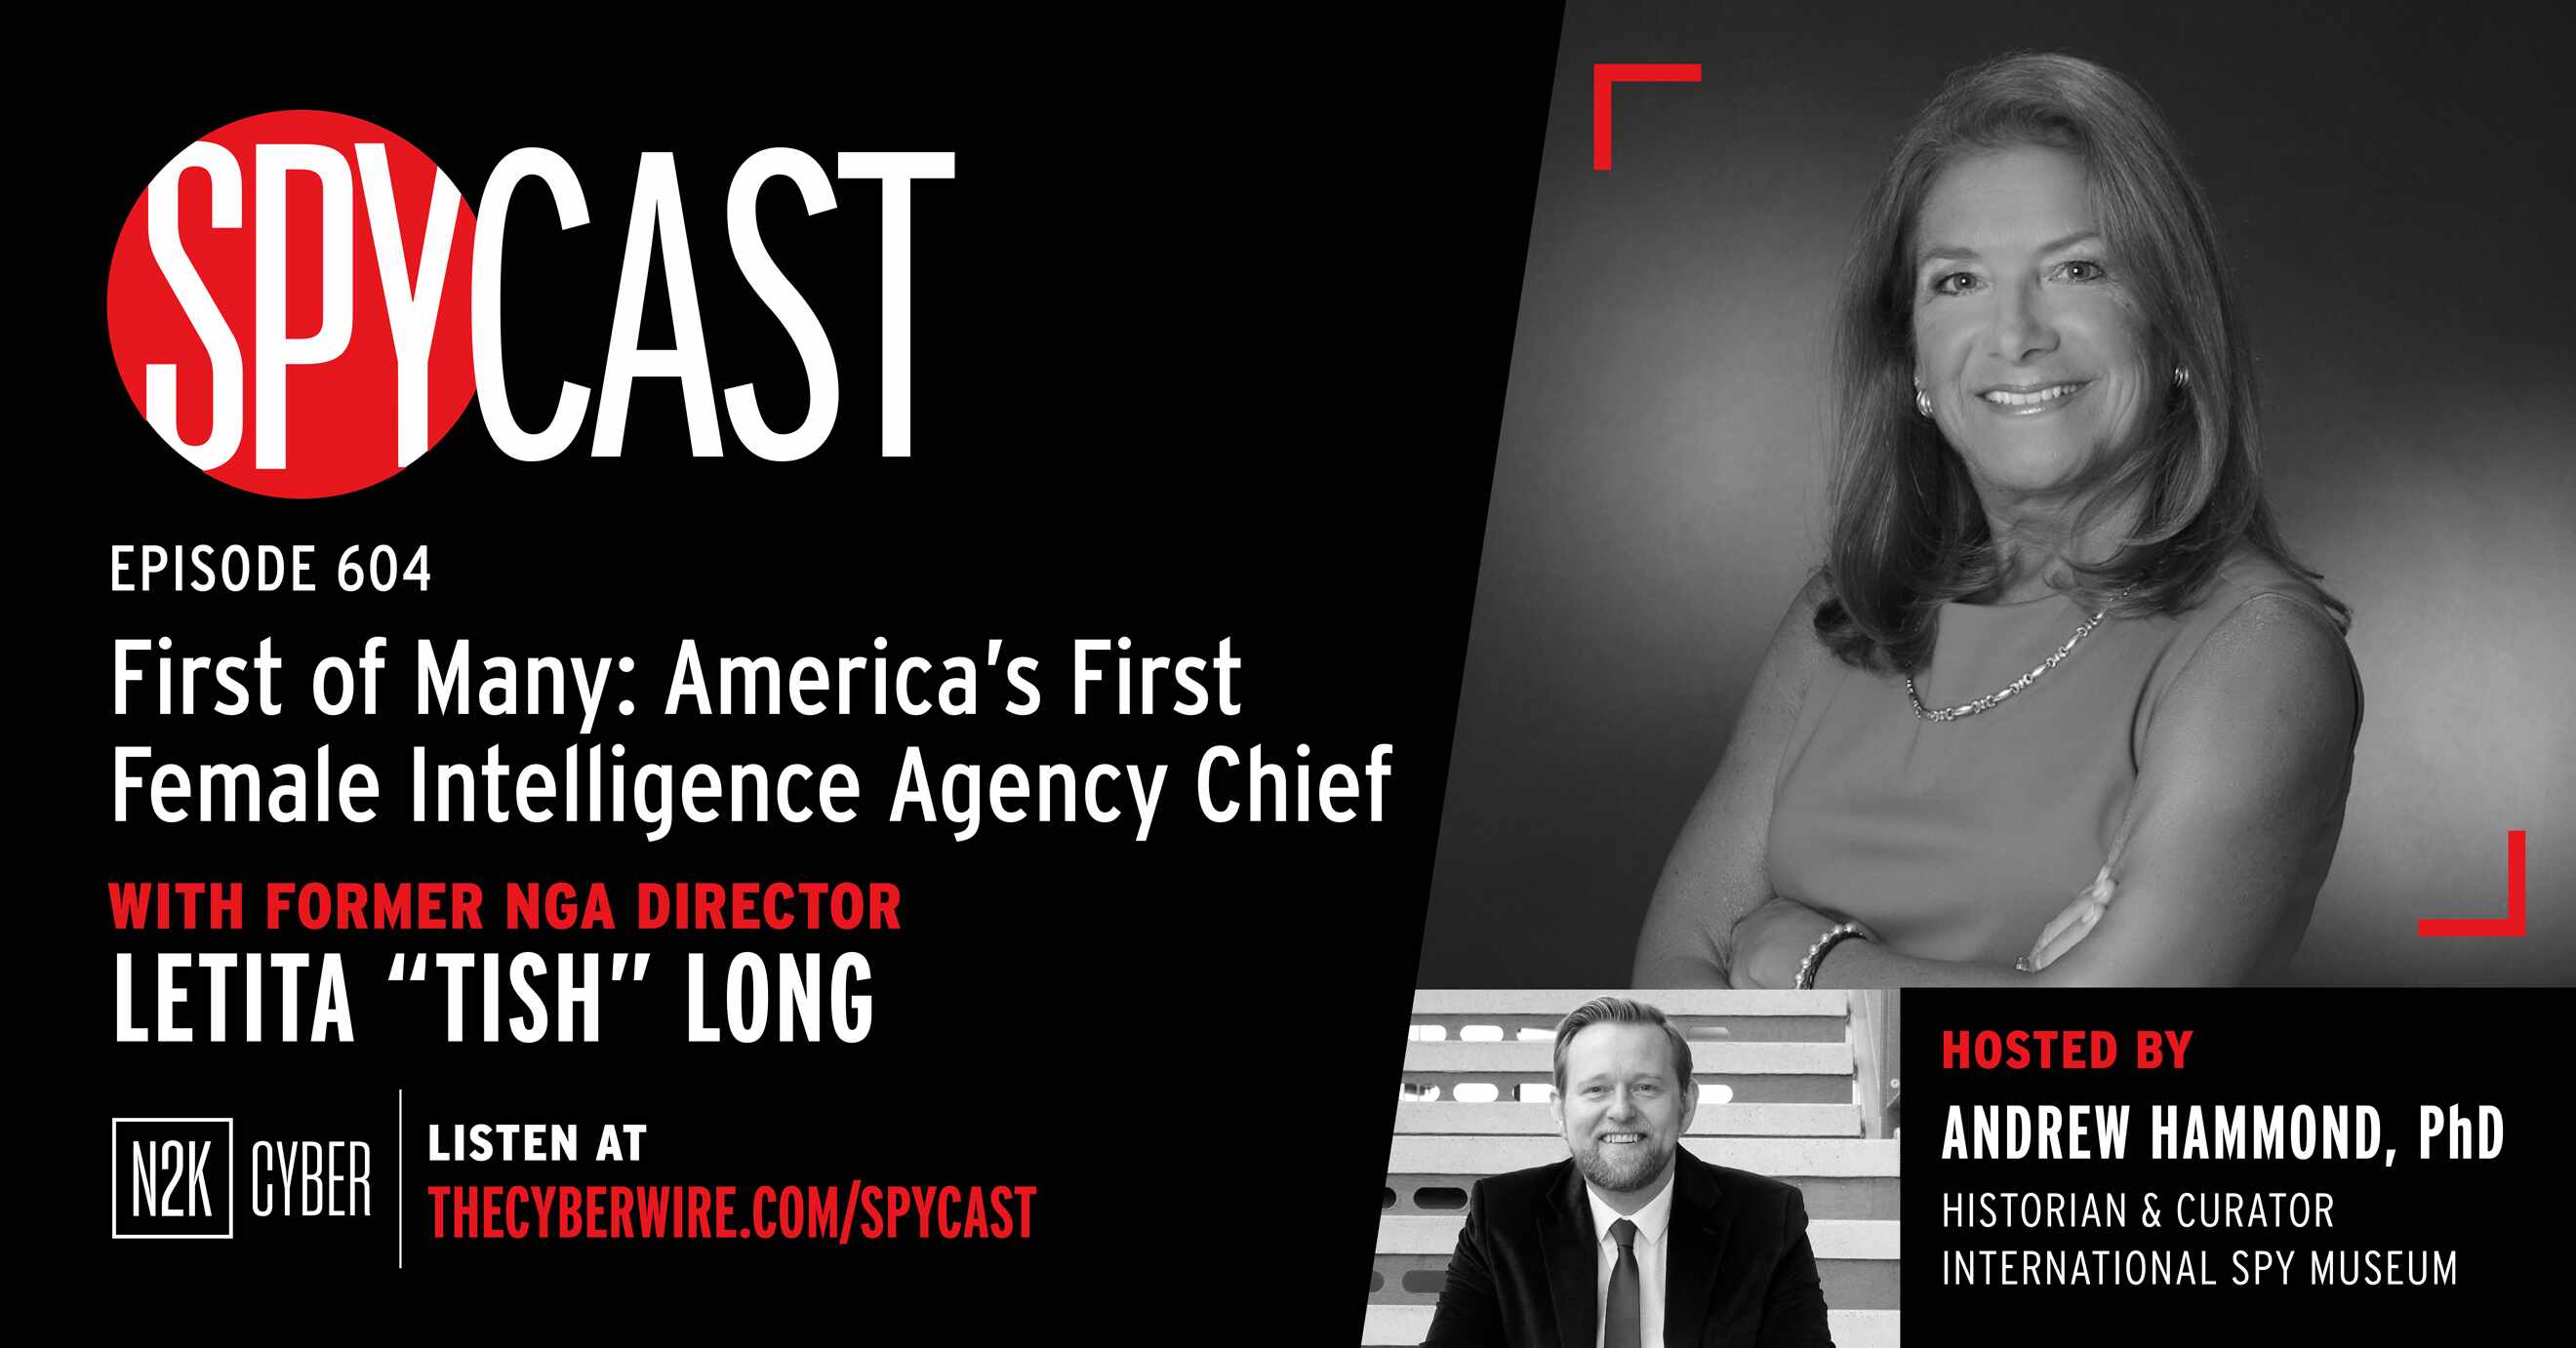 “First of Many…America’s First Intelligence Agency Chief” – with former NGA Director Letitia “Tish” Long